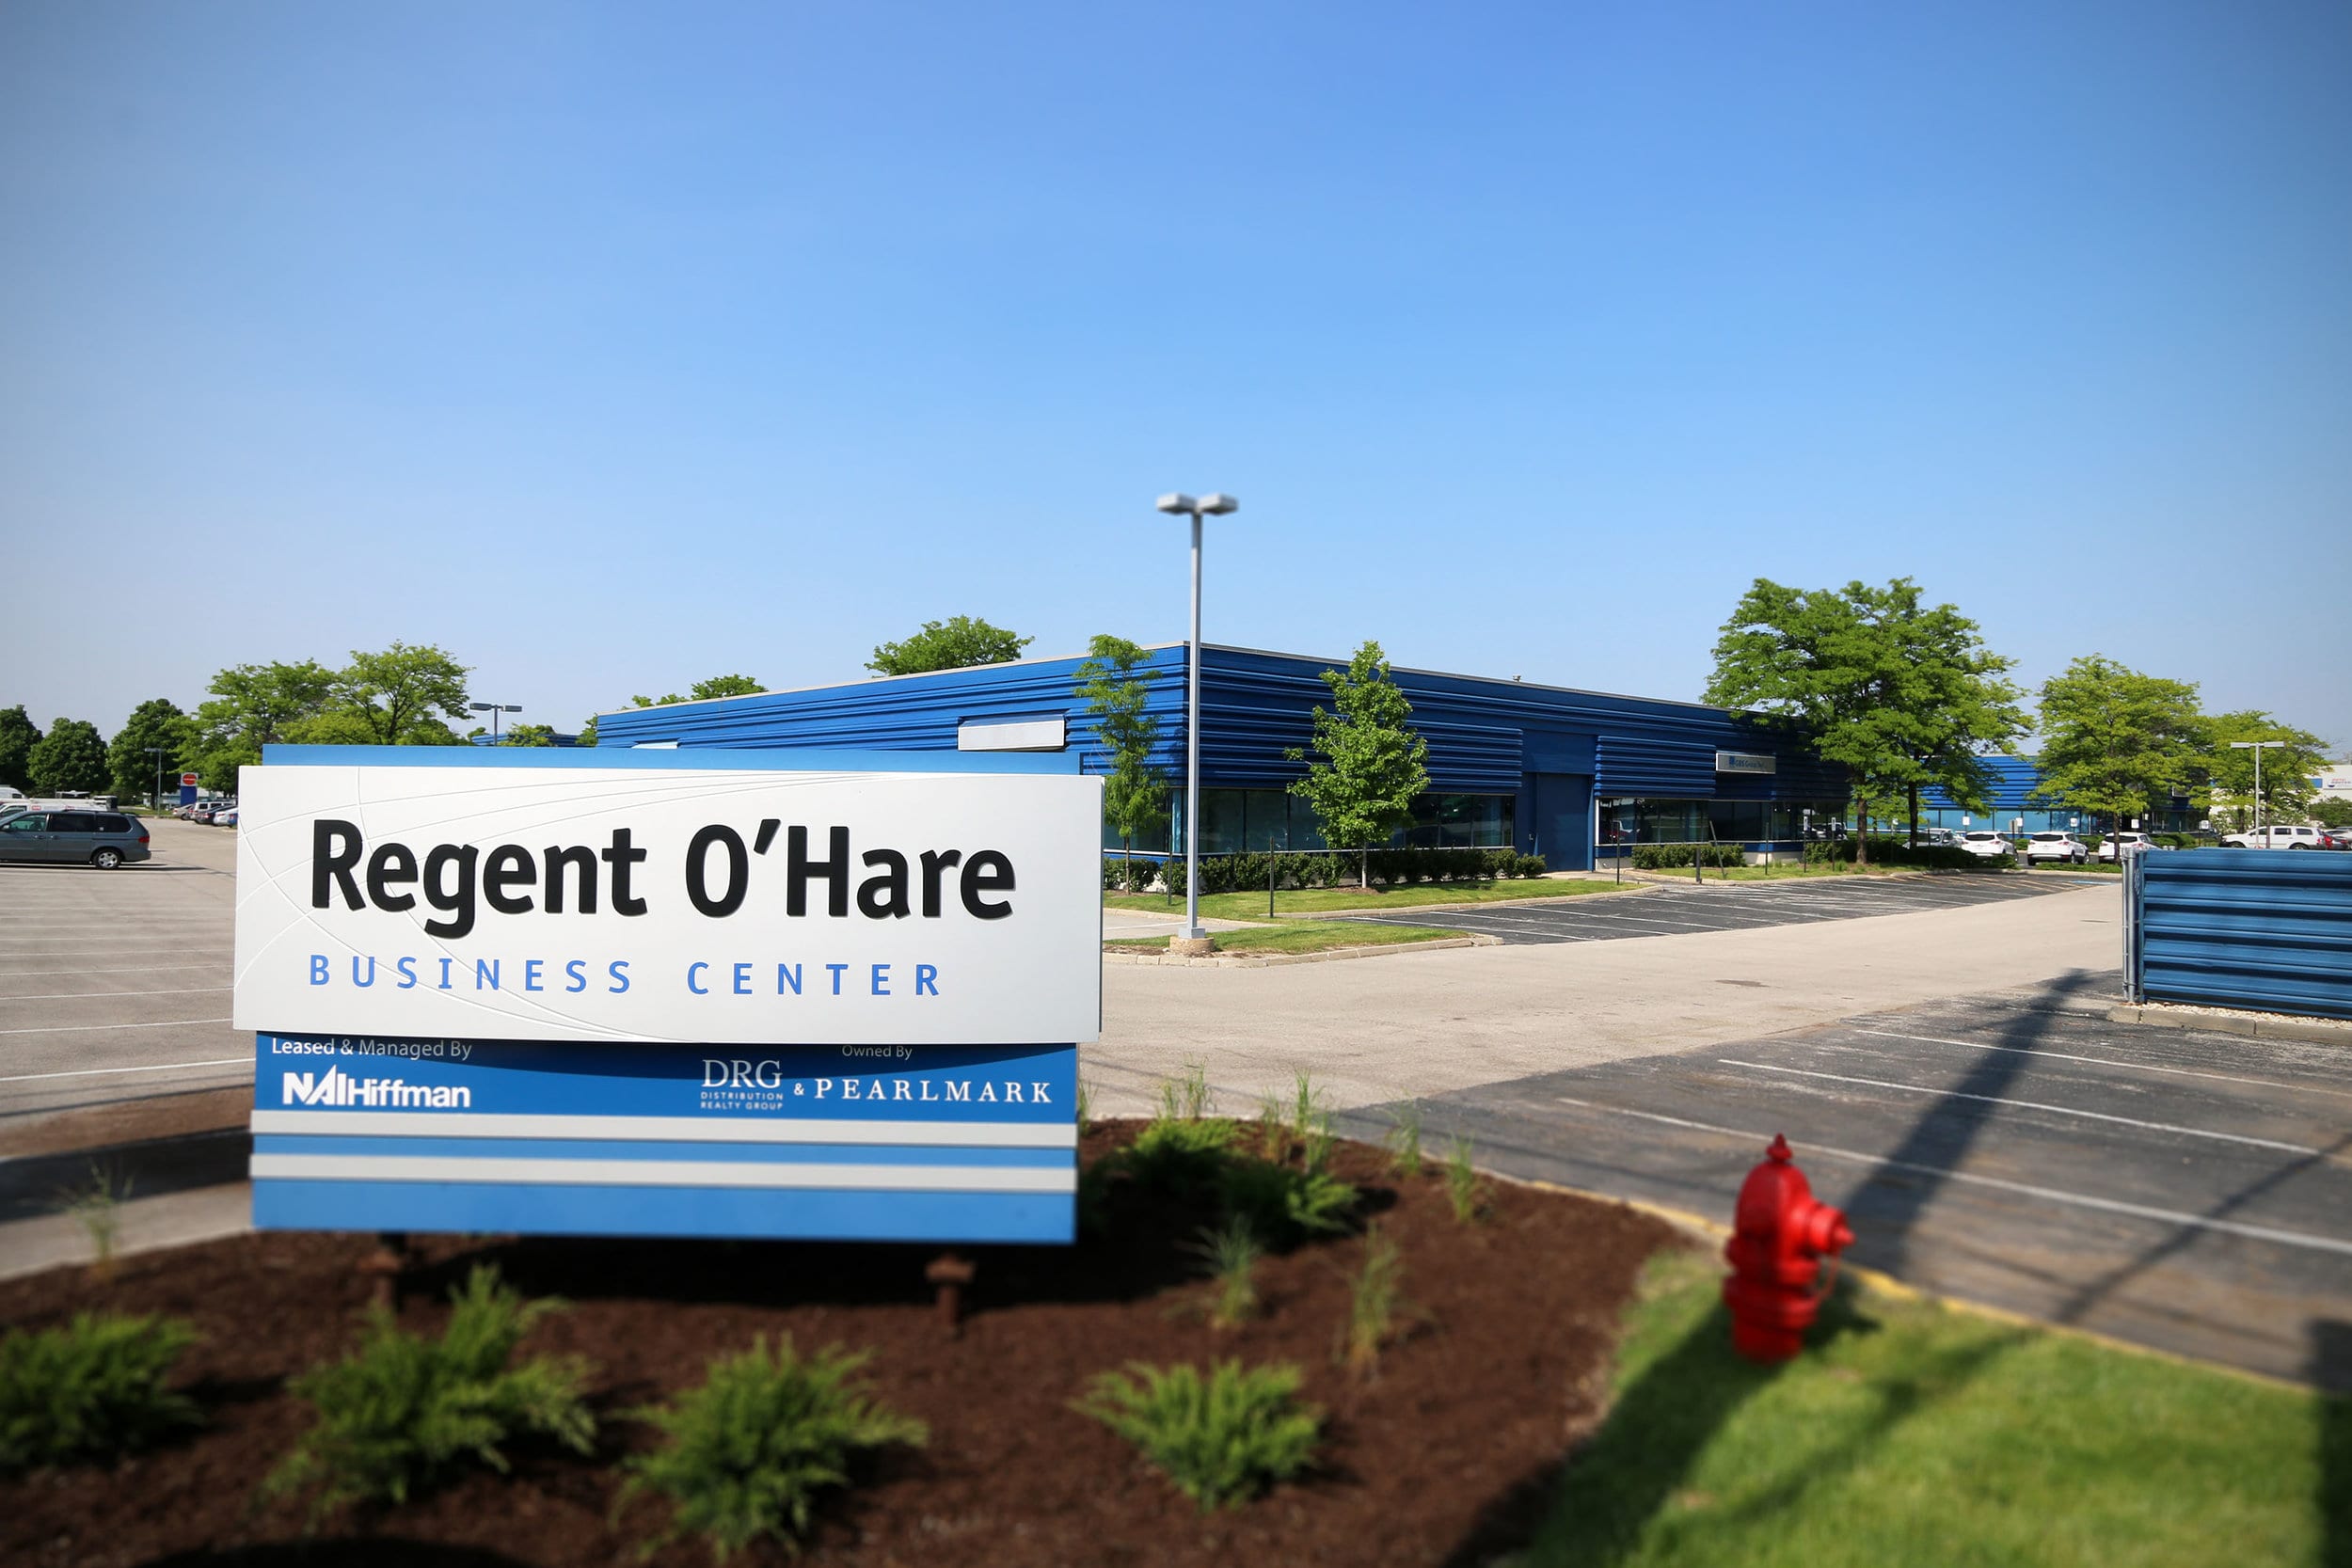 Regent O’Hare leasing activity heats up with 3 new transactions totaling over 55,000 SF